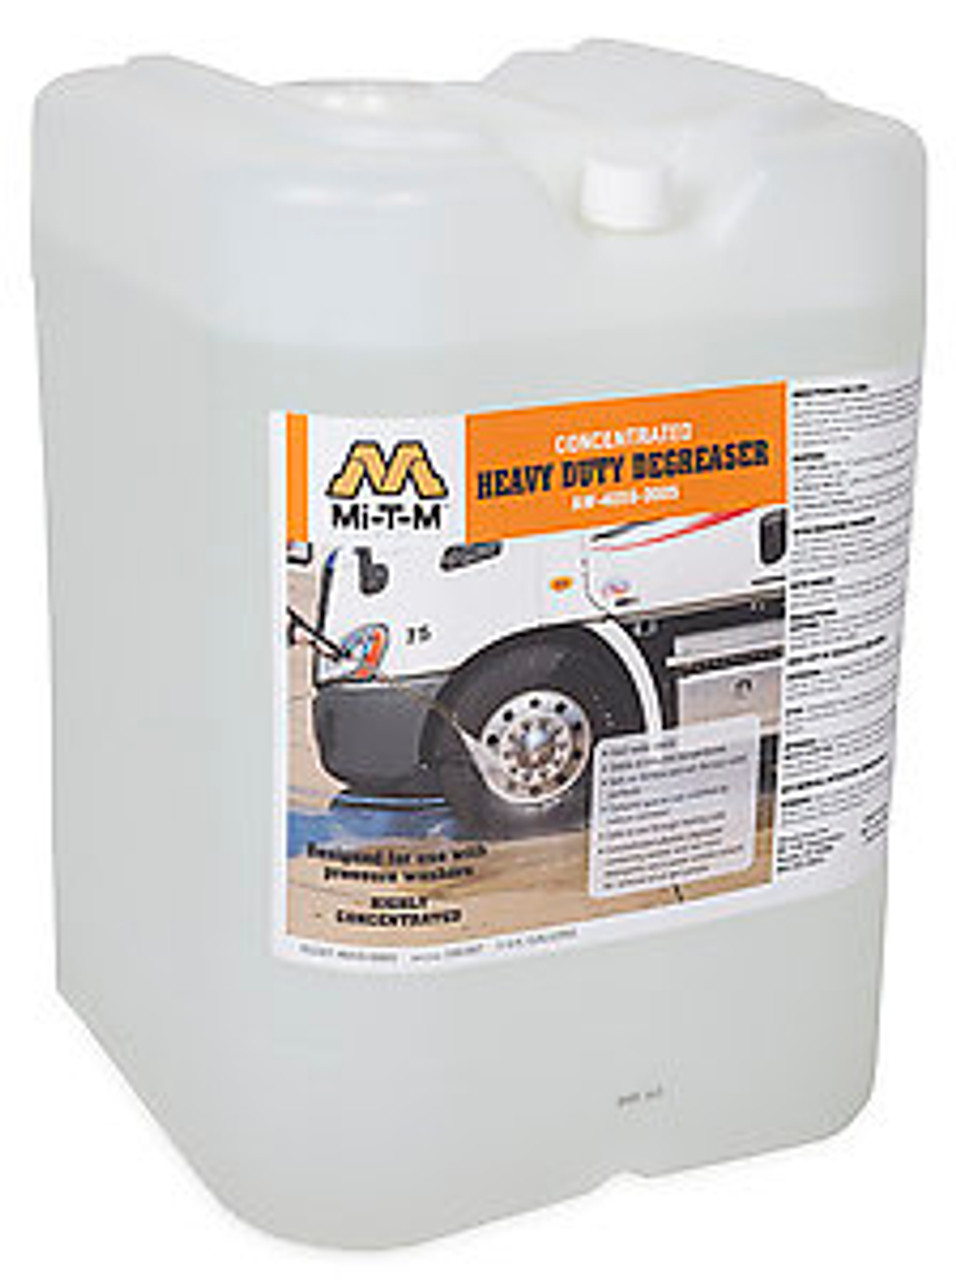 Mi-T-M AW-4059-0005 Injectors and Detergents, Heavy-Duty Degreaser - 5 Gallon